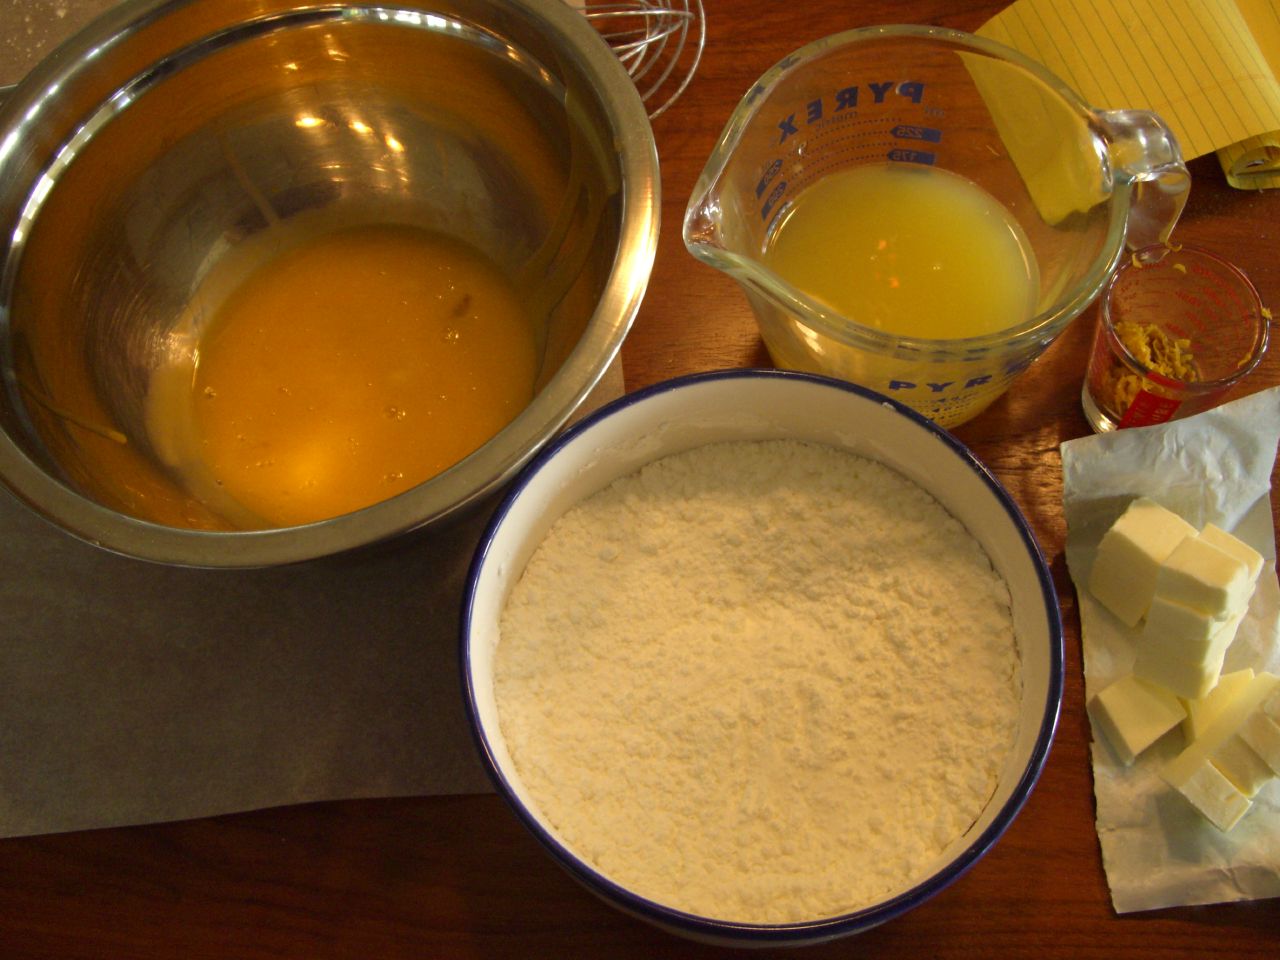 the ingredients for an orange cake are placed on a table